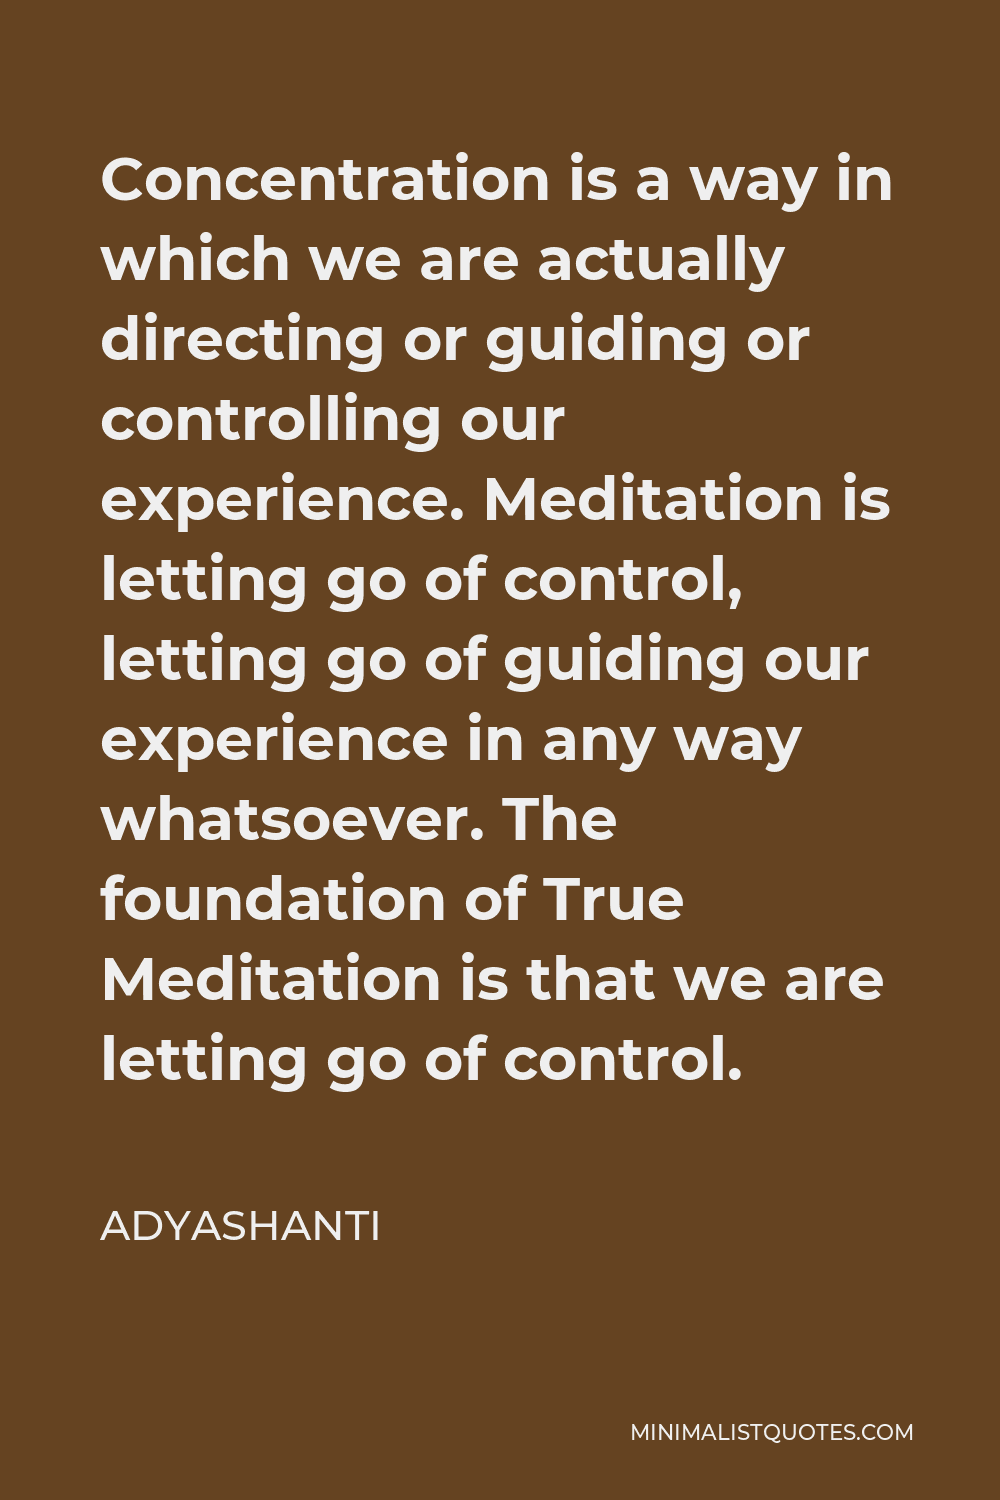 Adyashanti Quote - Concentration is a way in which we are actually directing or guiding or controlling our experience. Meditation is letting go of control, letting go of guiding our experience in any way whatsoever. The foundation of True Meditation is that we are letting go of control.